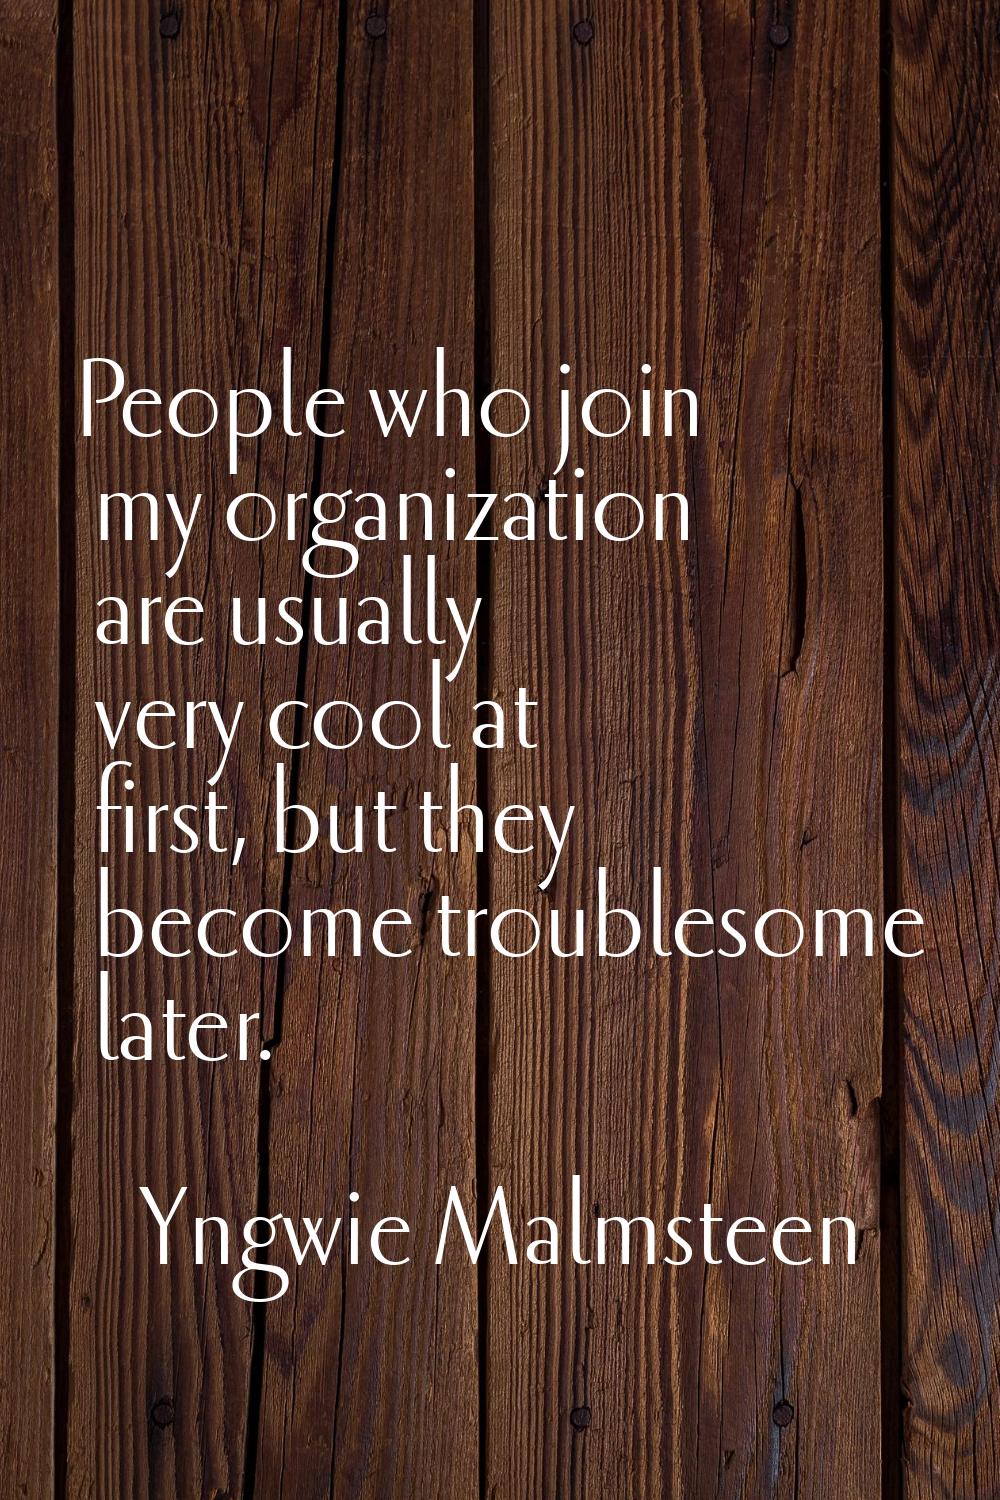 People who join my organization are usually very cool at first, but they become troublesome later.